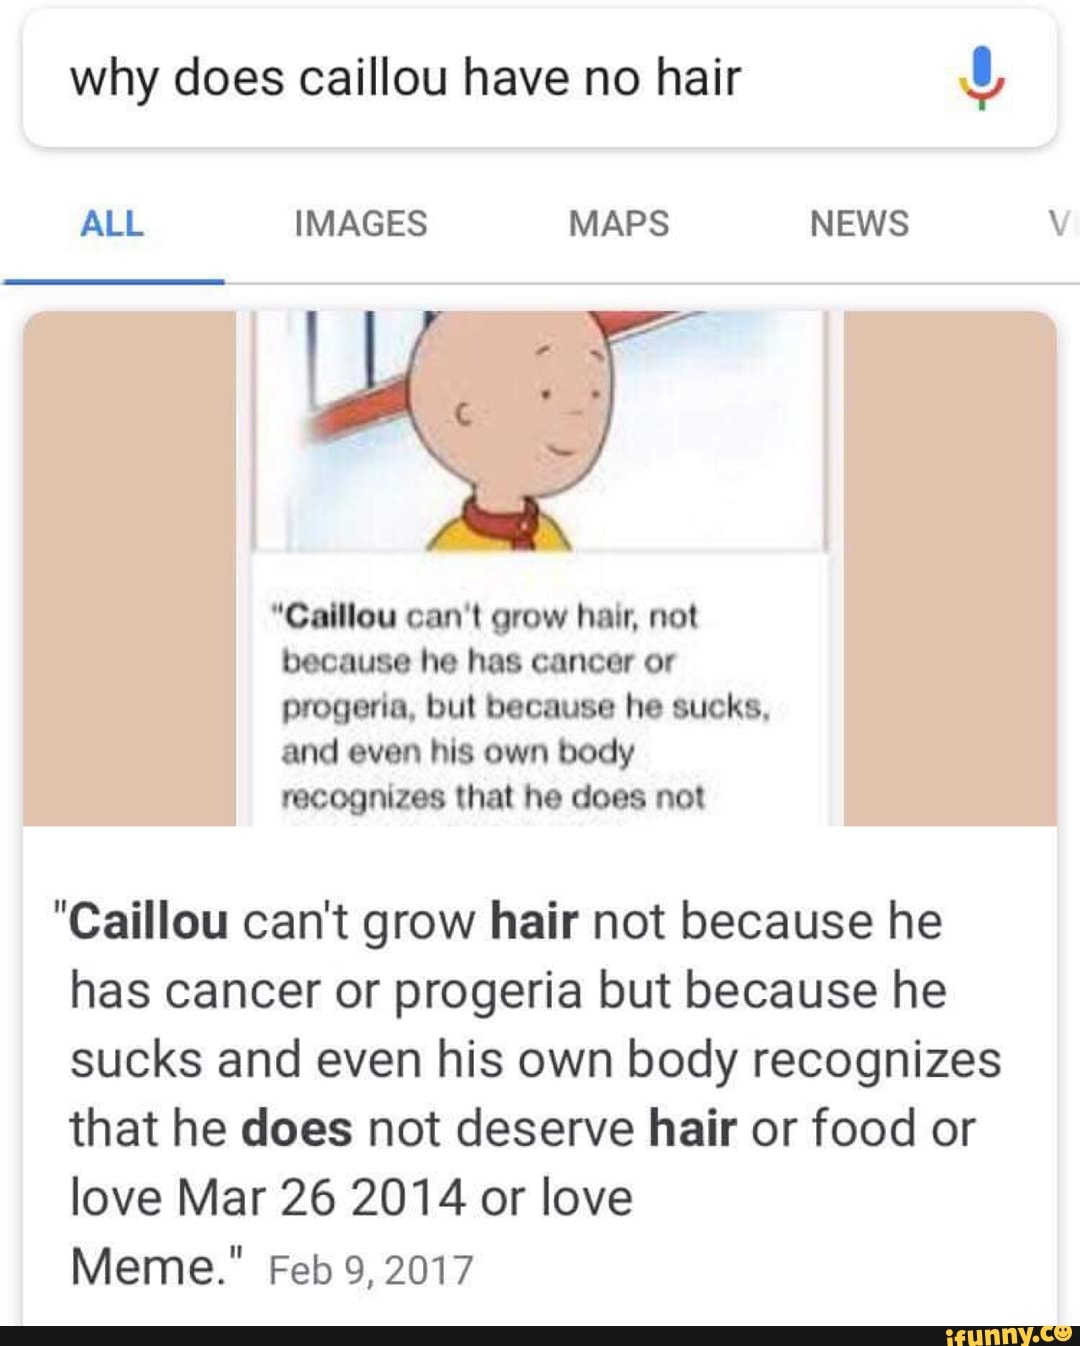 Why Does Caillou Have No Hair Caillou Can T Grow Hmr Not Because